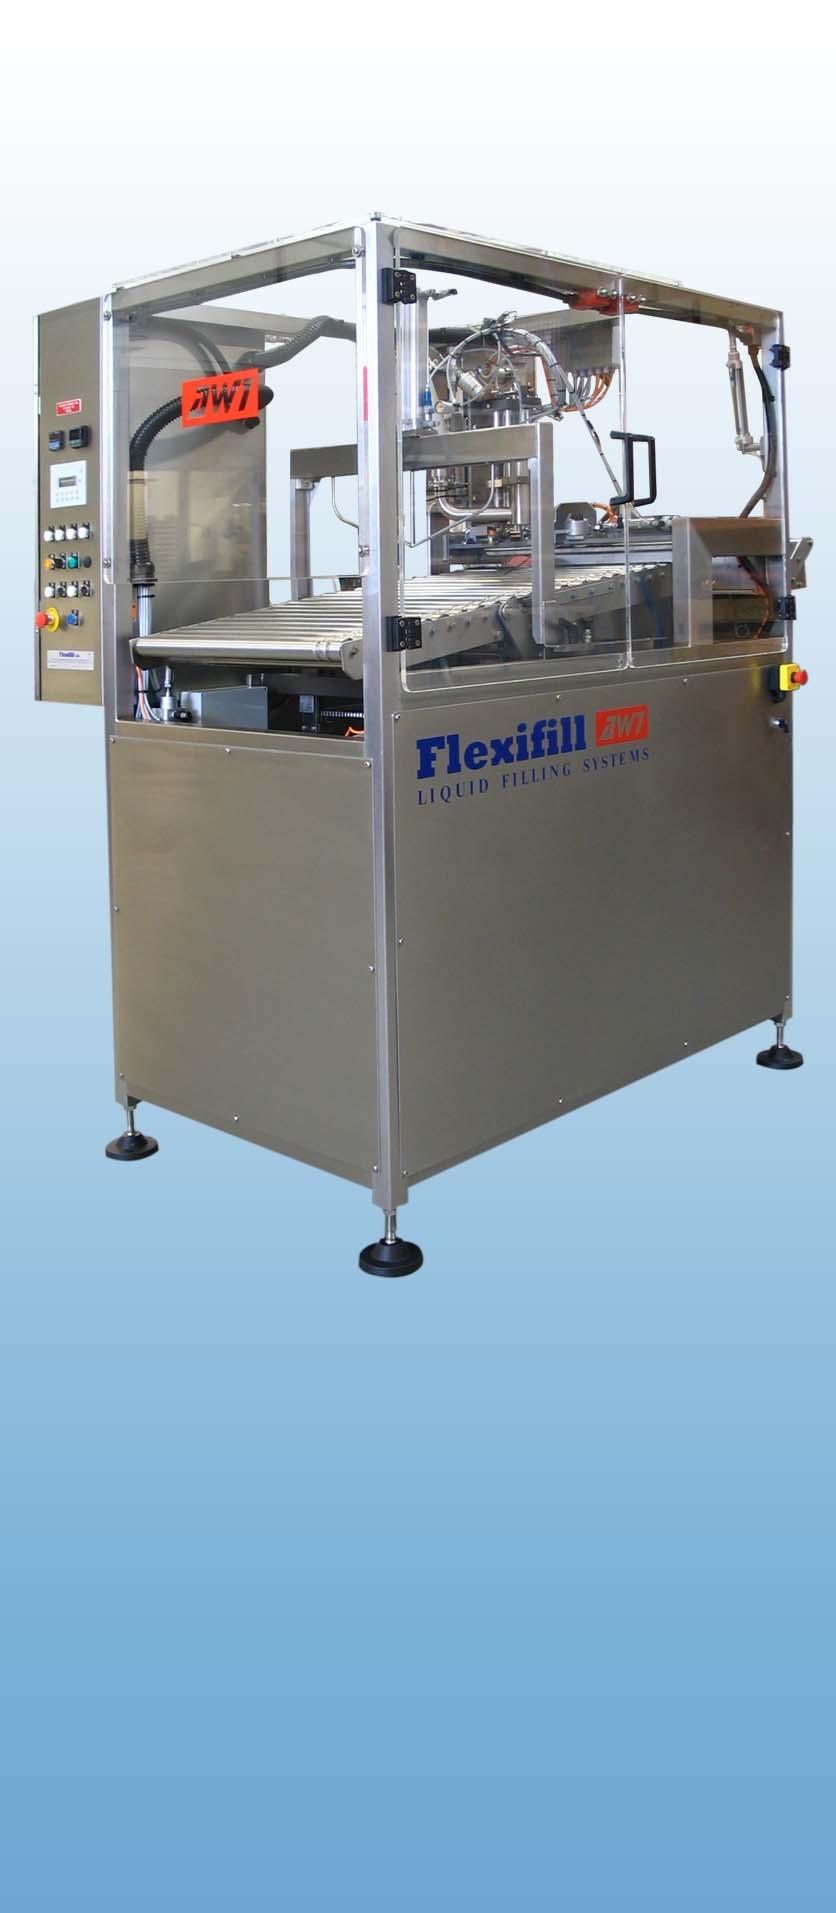 Aw1 FULLY AUTOMATIC WEB FED FILLER The Flexifill AW1 is a compact fully auto Web Fed Bag-in-Box filler